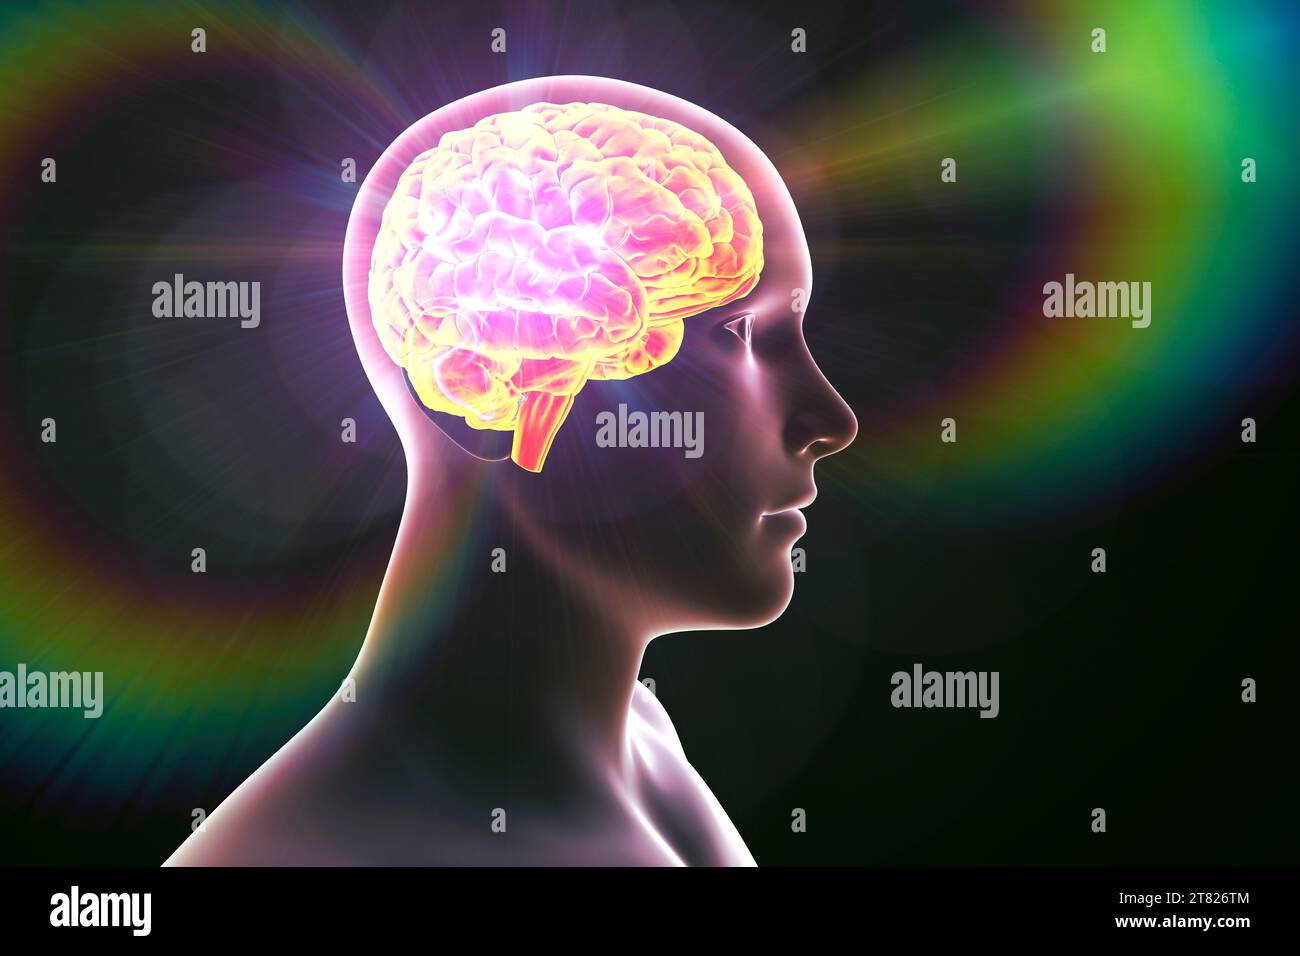 Energy field generated by the human brain, illustration Stock Photo